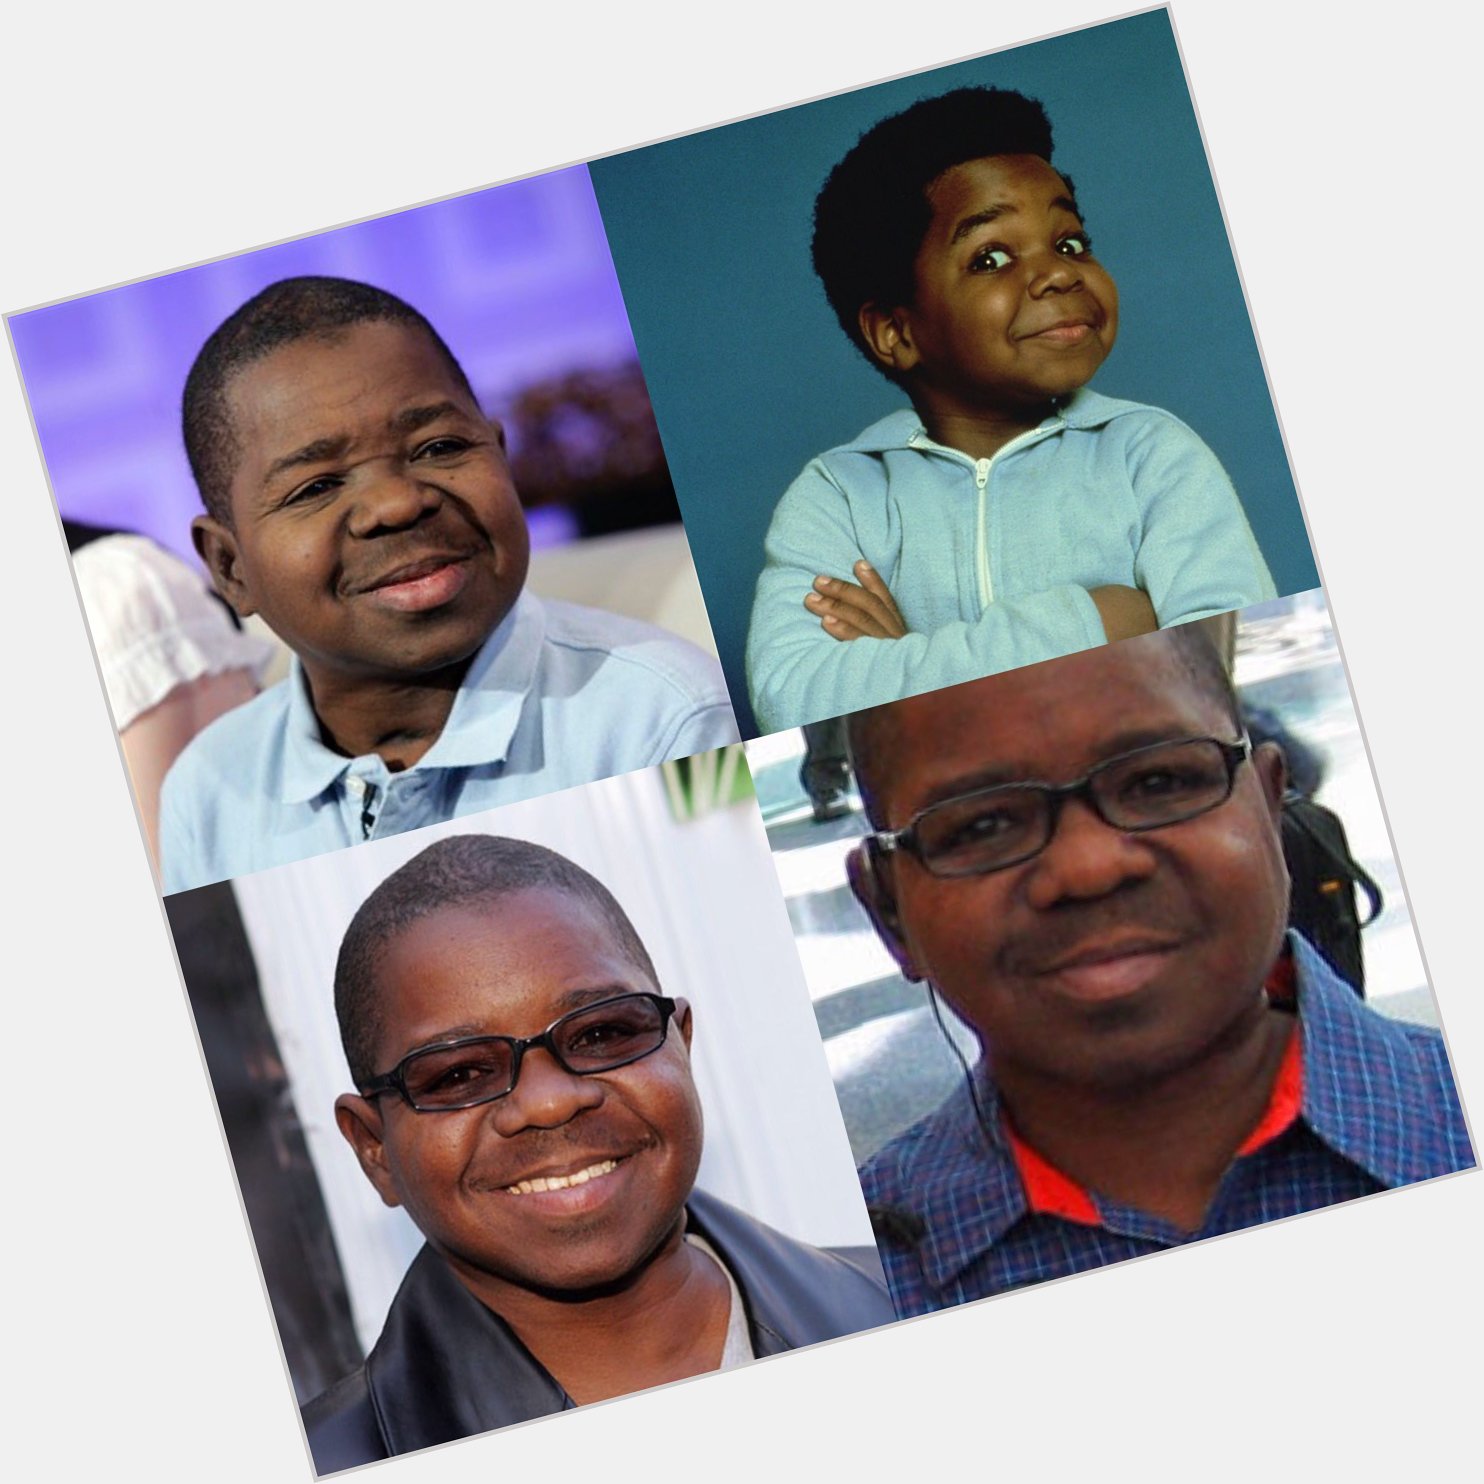 Happy 51 birthday to Gary Coleman up in heaven. May he Rest In Peace.  